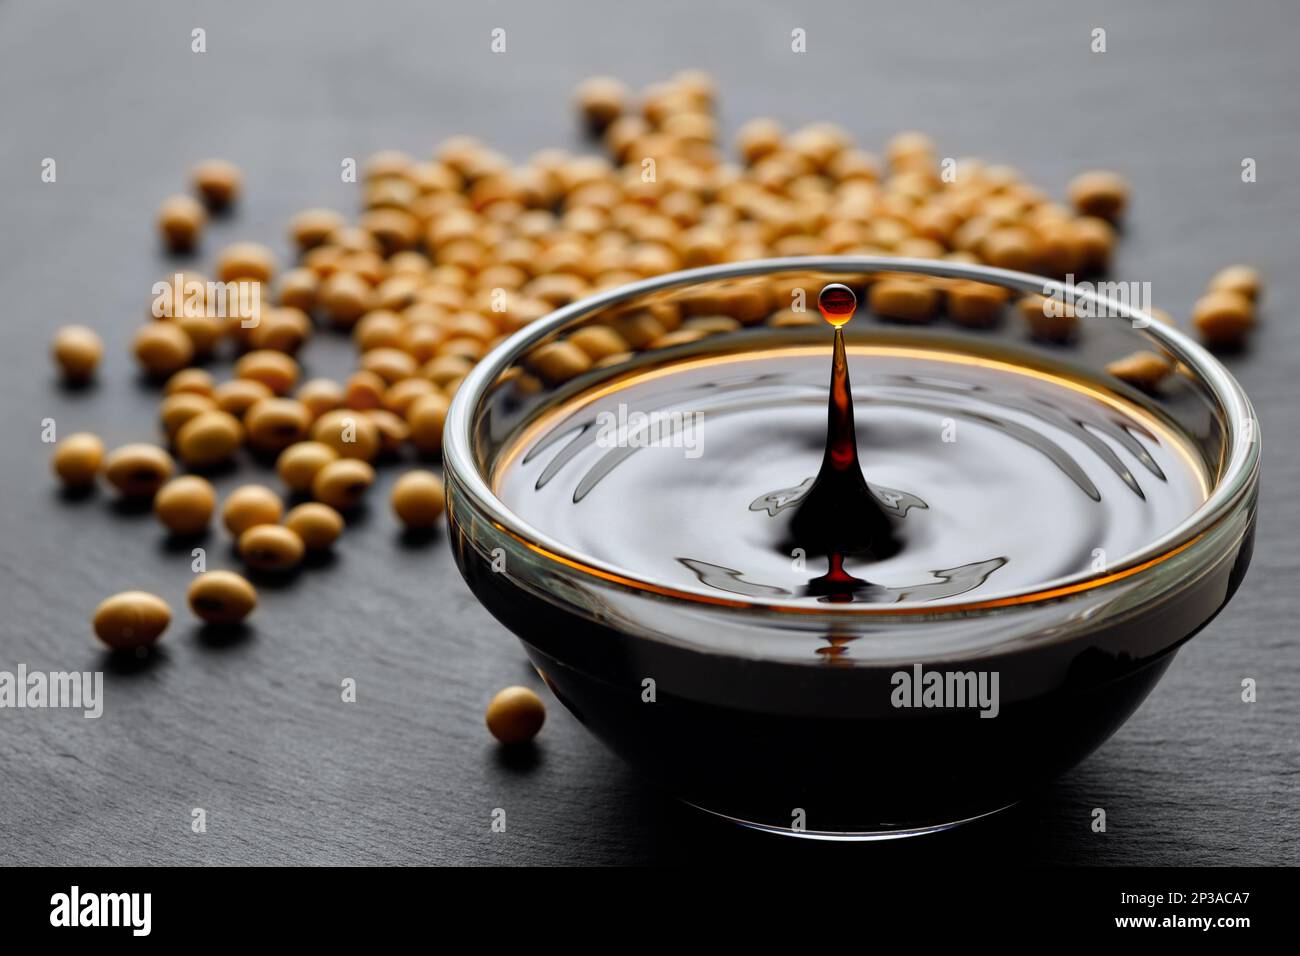 soy sauce with spalsh and drop in glass bowl and dry soybeans on black stone background Stock Photo